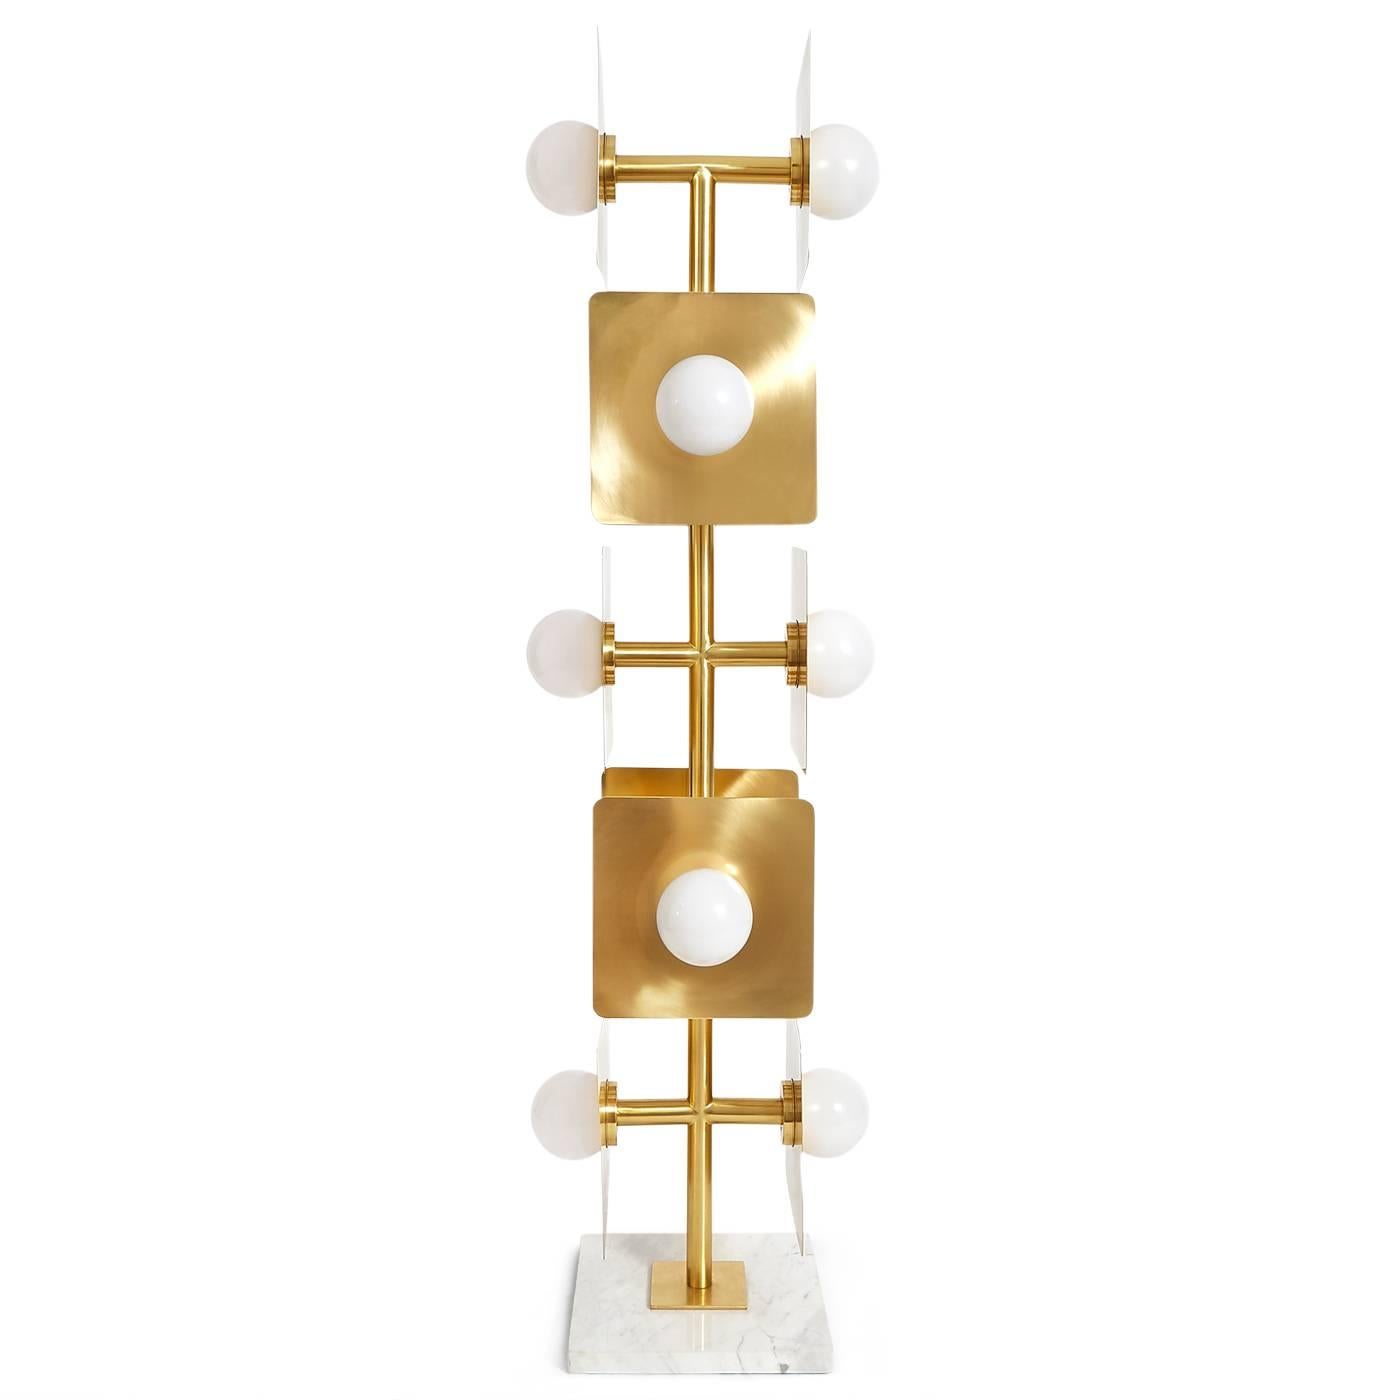 Architectural Modernism. Sculptural form meets illuminating function in our puzzle floor lamp. A simple, but bold composition of rounded square sheets of solid brass with bold globes on a Minimalist stem and a solid Carrara marble base. Five feet